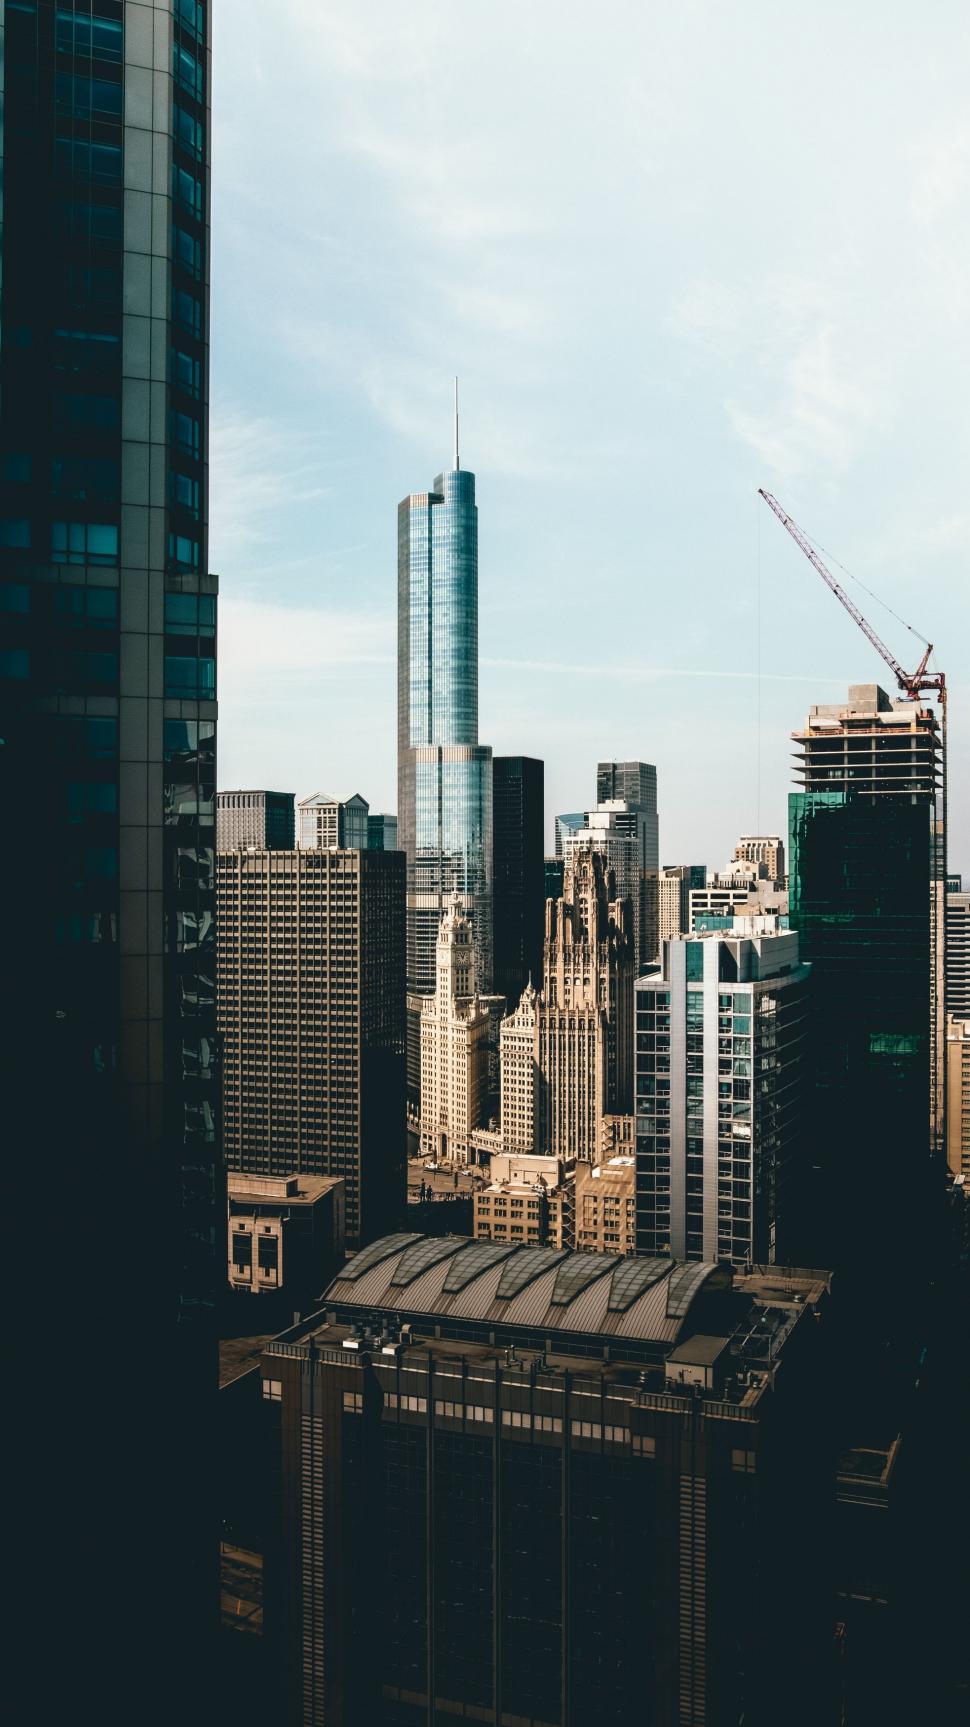 Free Image of Overlooking the Cityscape From a High Rise Building 